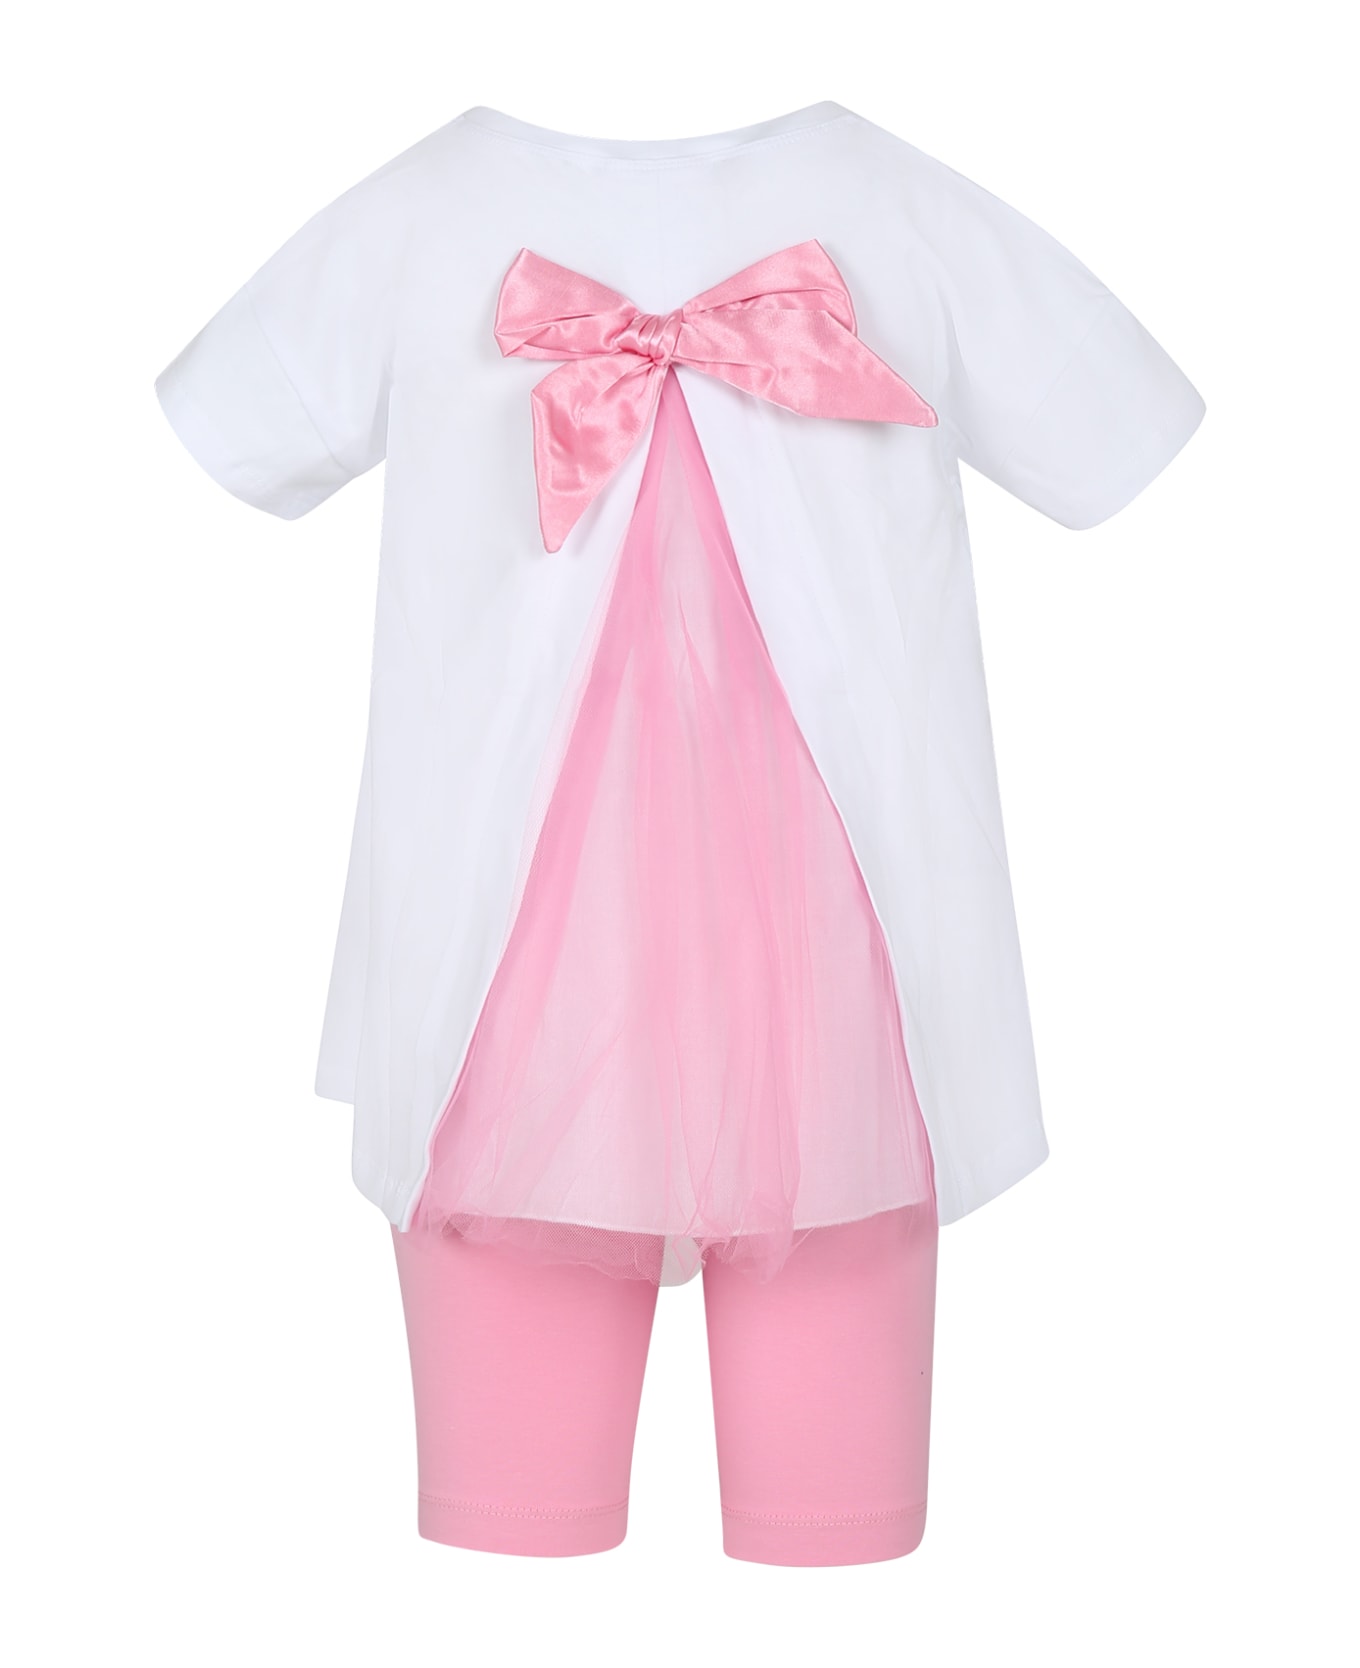 Monnalisa White Suit For Girl With Barbie Print And Rhinestone - Multicolor ジャンプスーツ